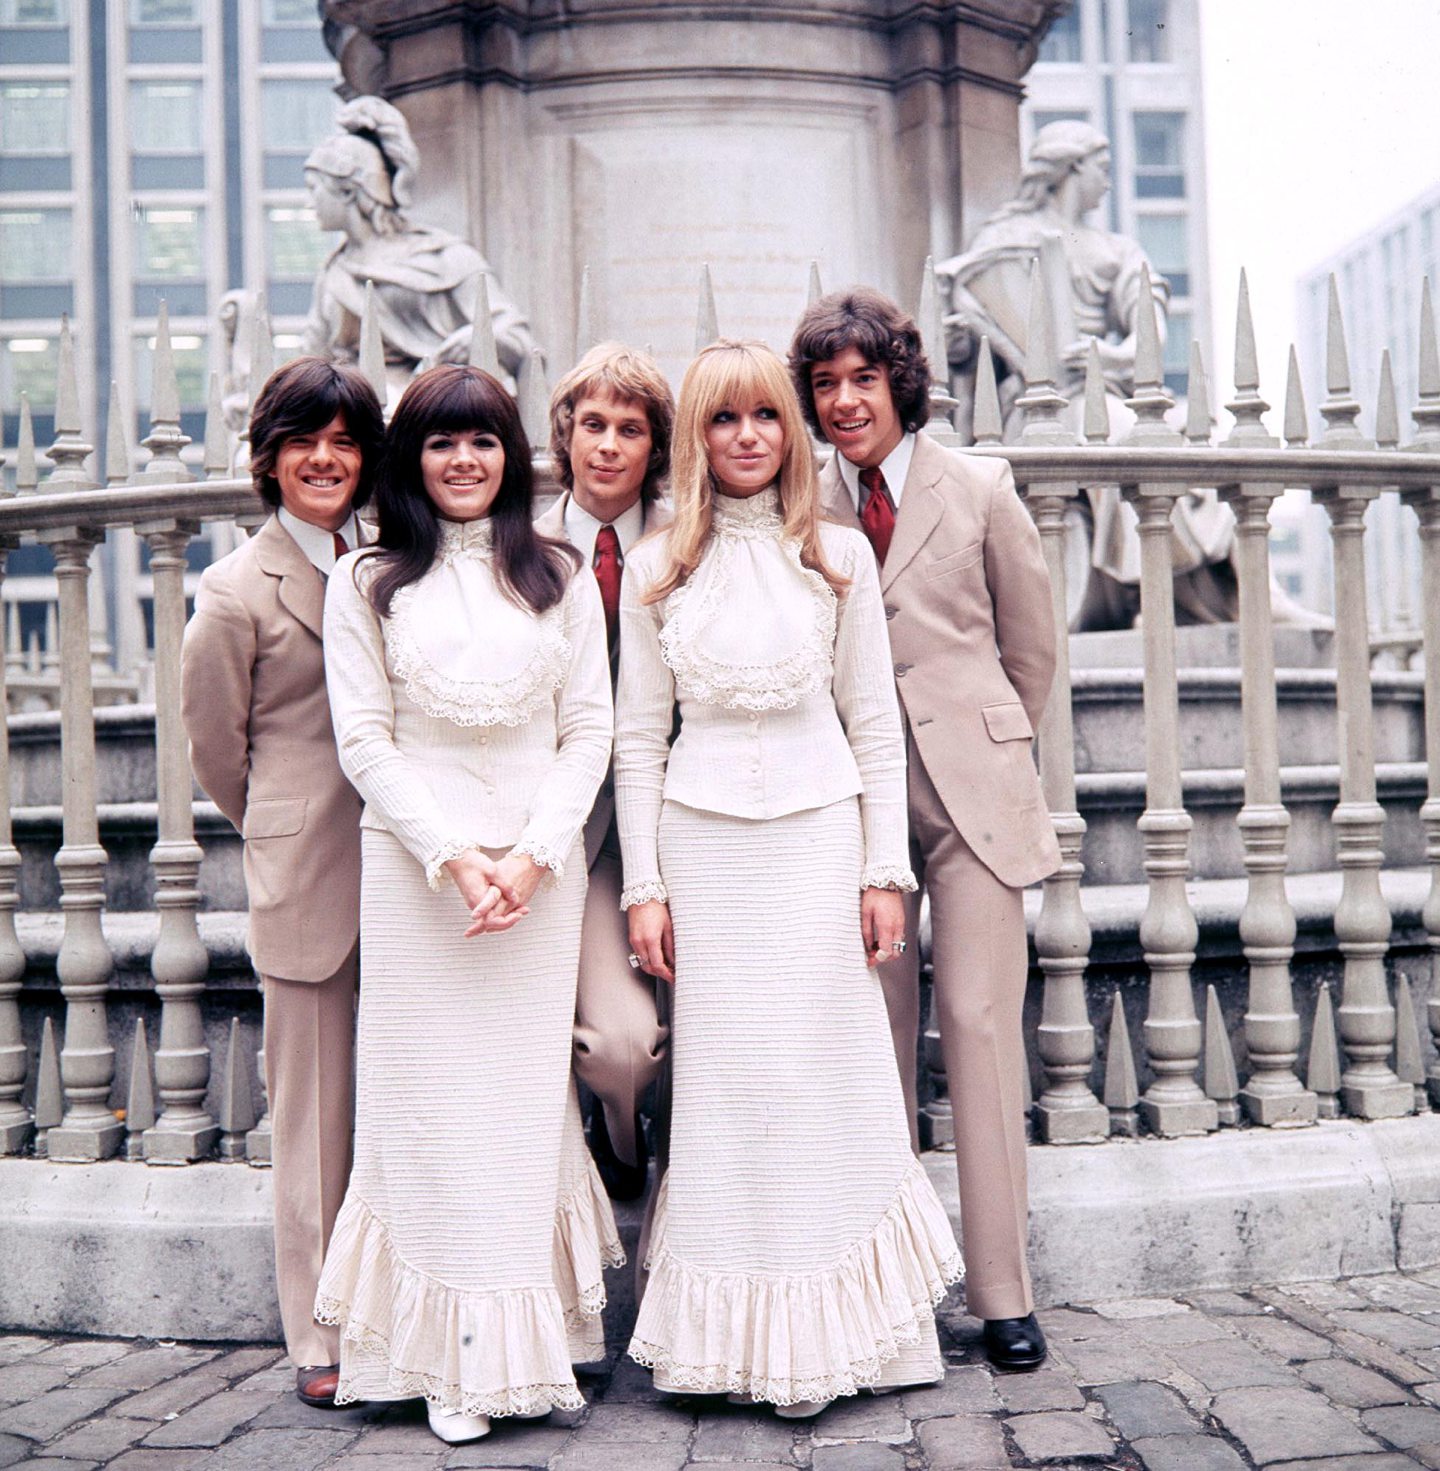 The New Seekers - Laurie Heath, Eve Graham, Marty Kristian, Sally Graham and Chris Barington - in 1969.